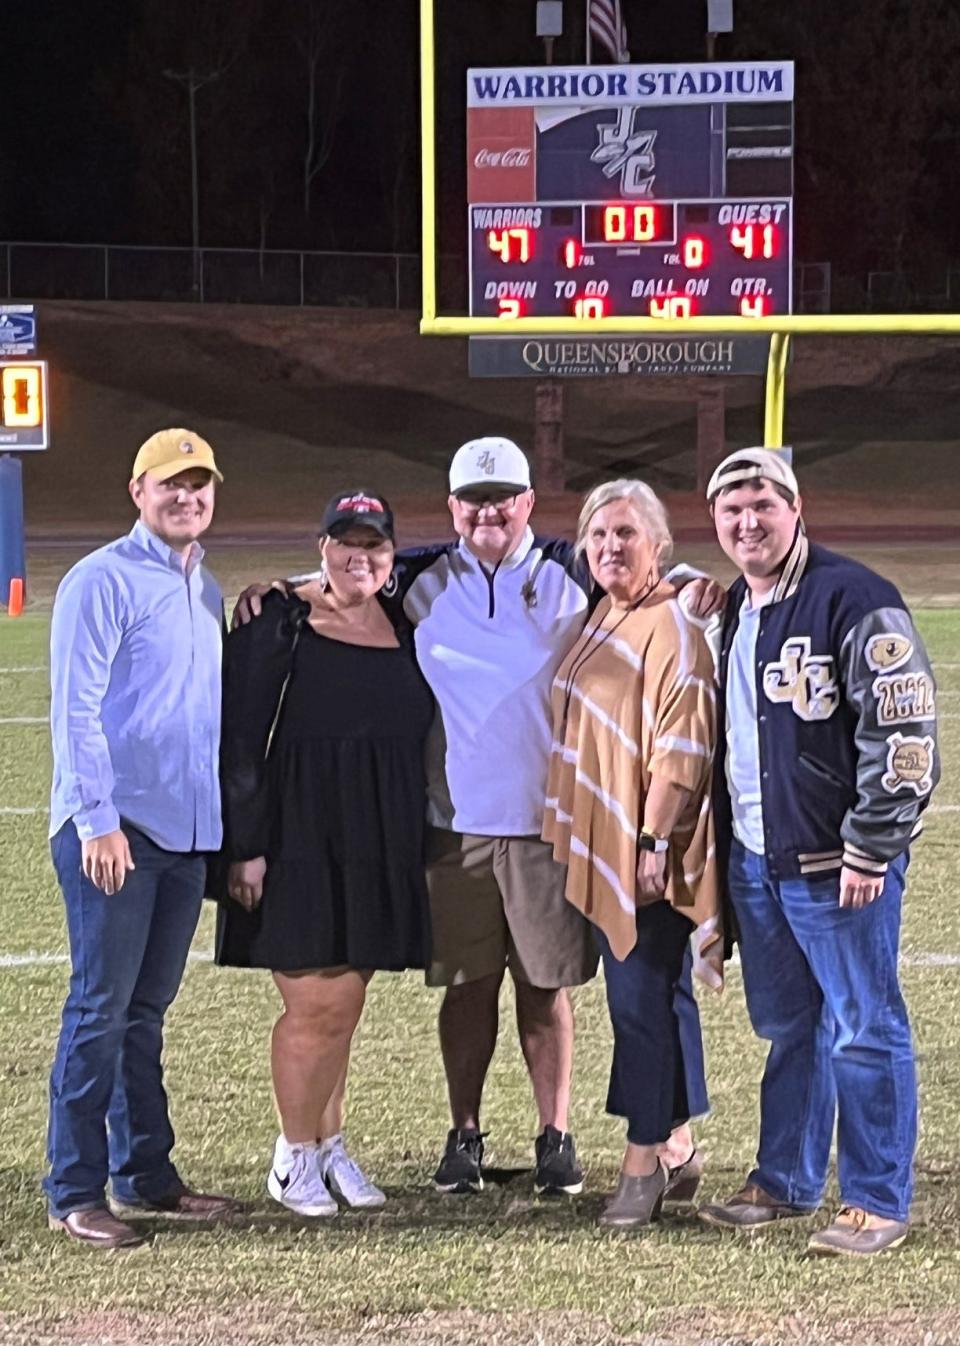 JB Arnold poses with his wife Stacy and children Bryant, Raley and Burton following his final home game at Jefferson County High School's Warrior stadium.